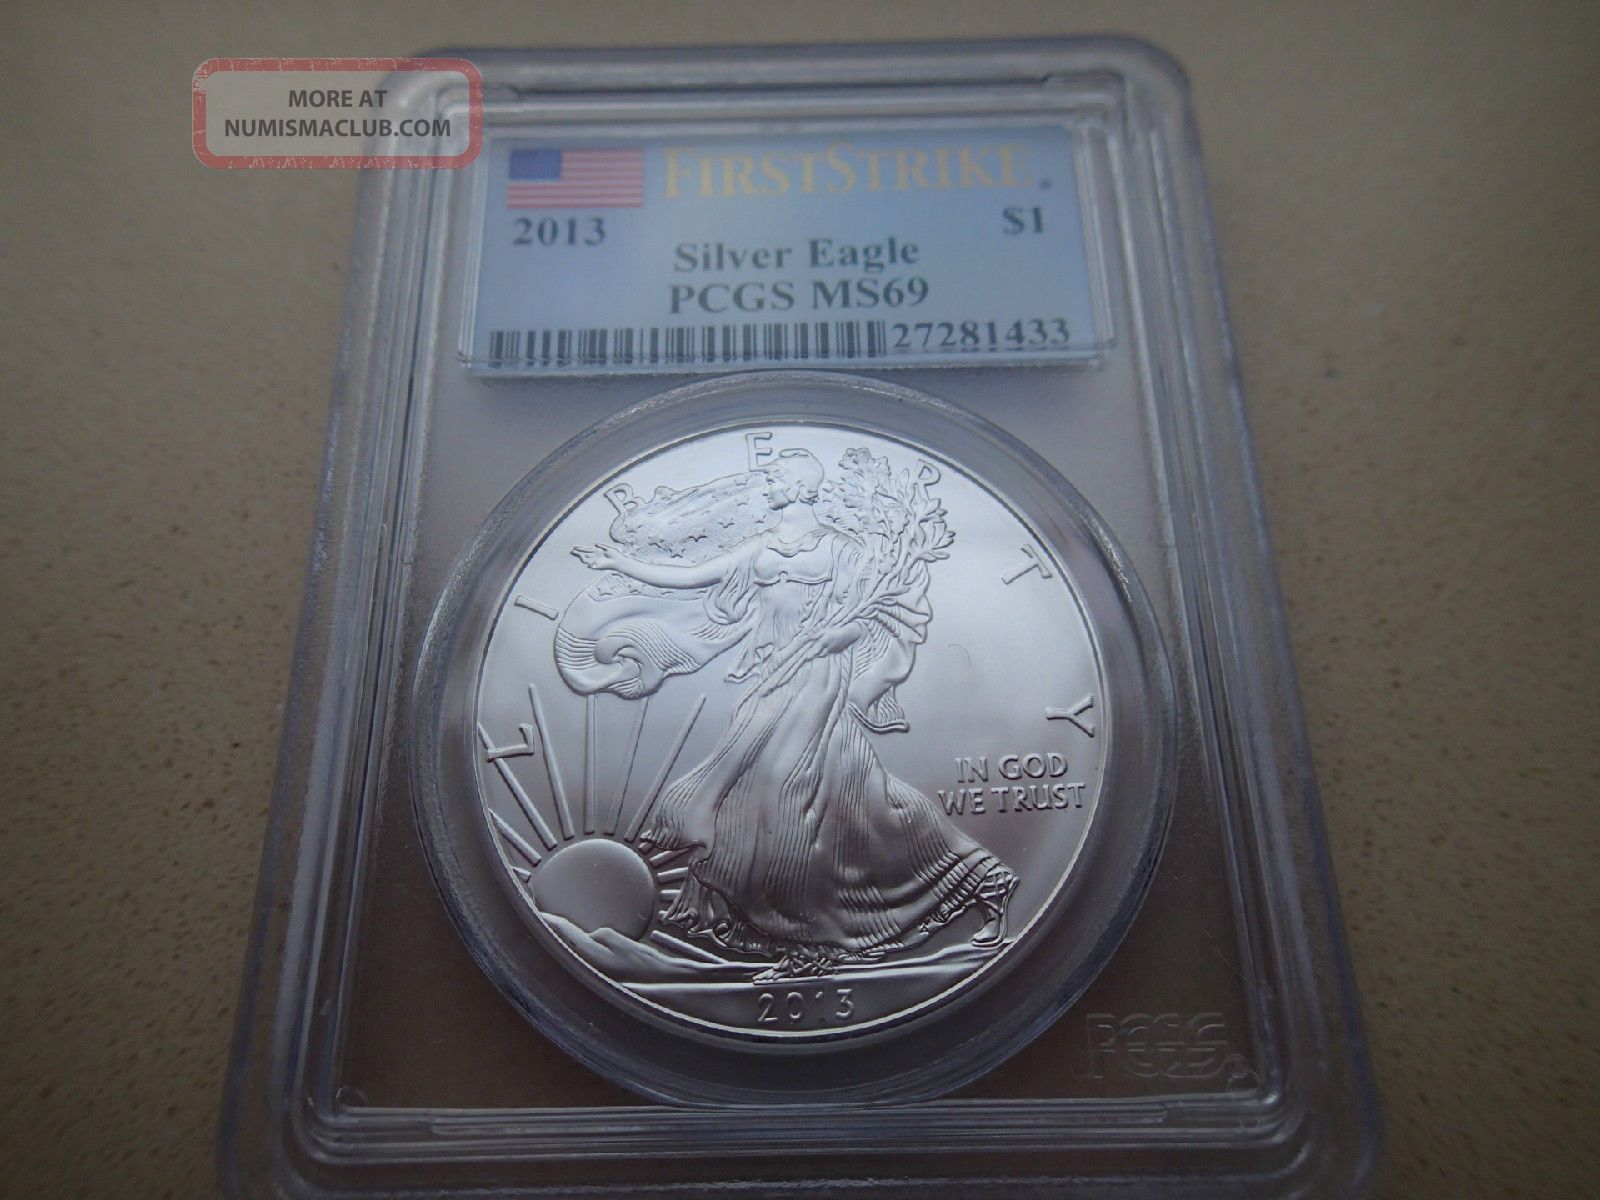 2013 Pcgs Ms69 First Strike Silver Eagle